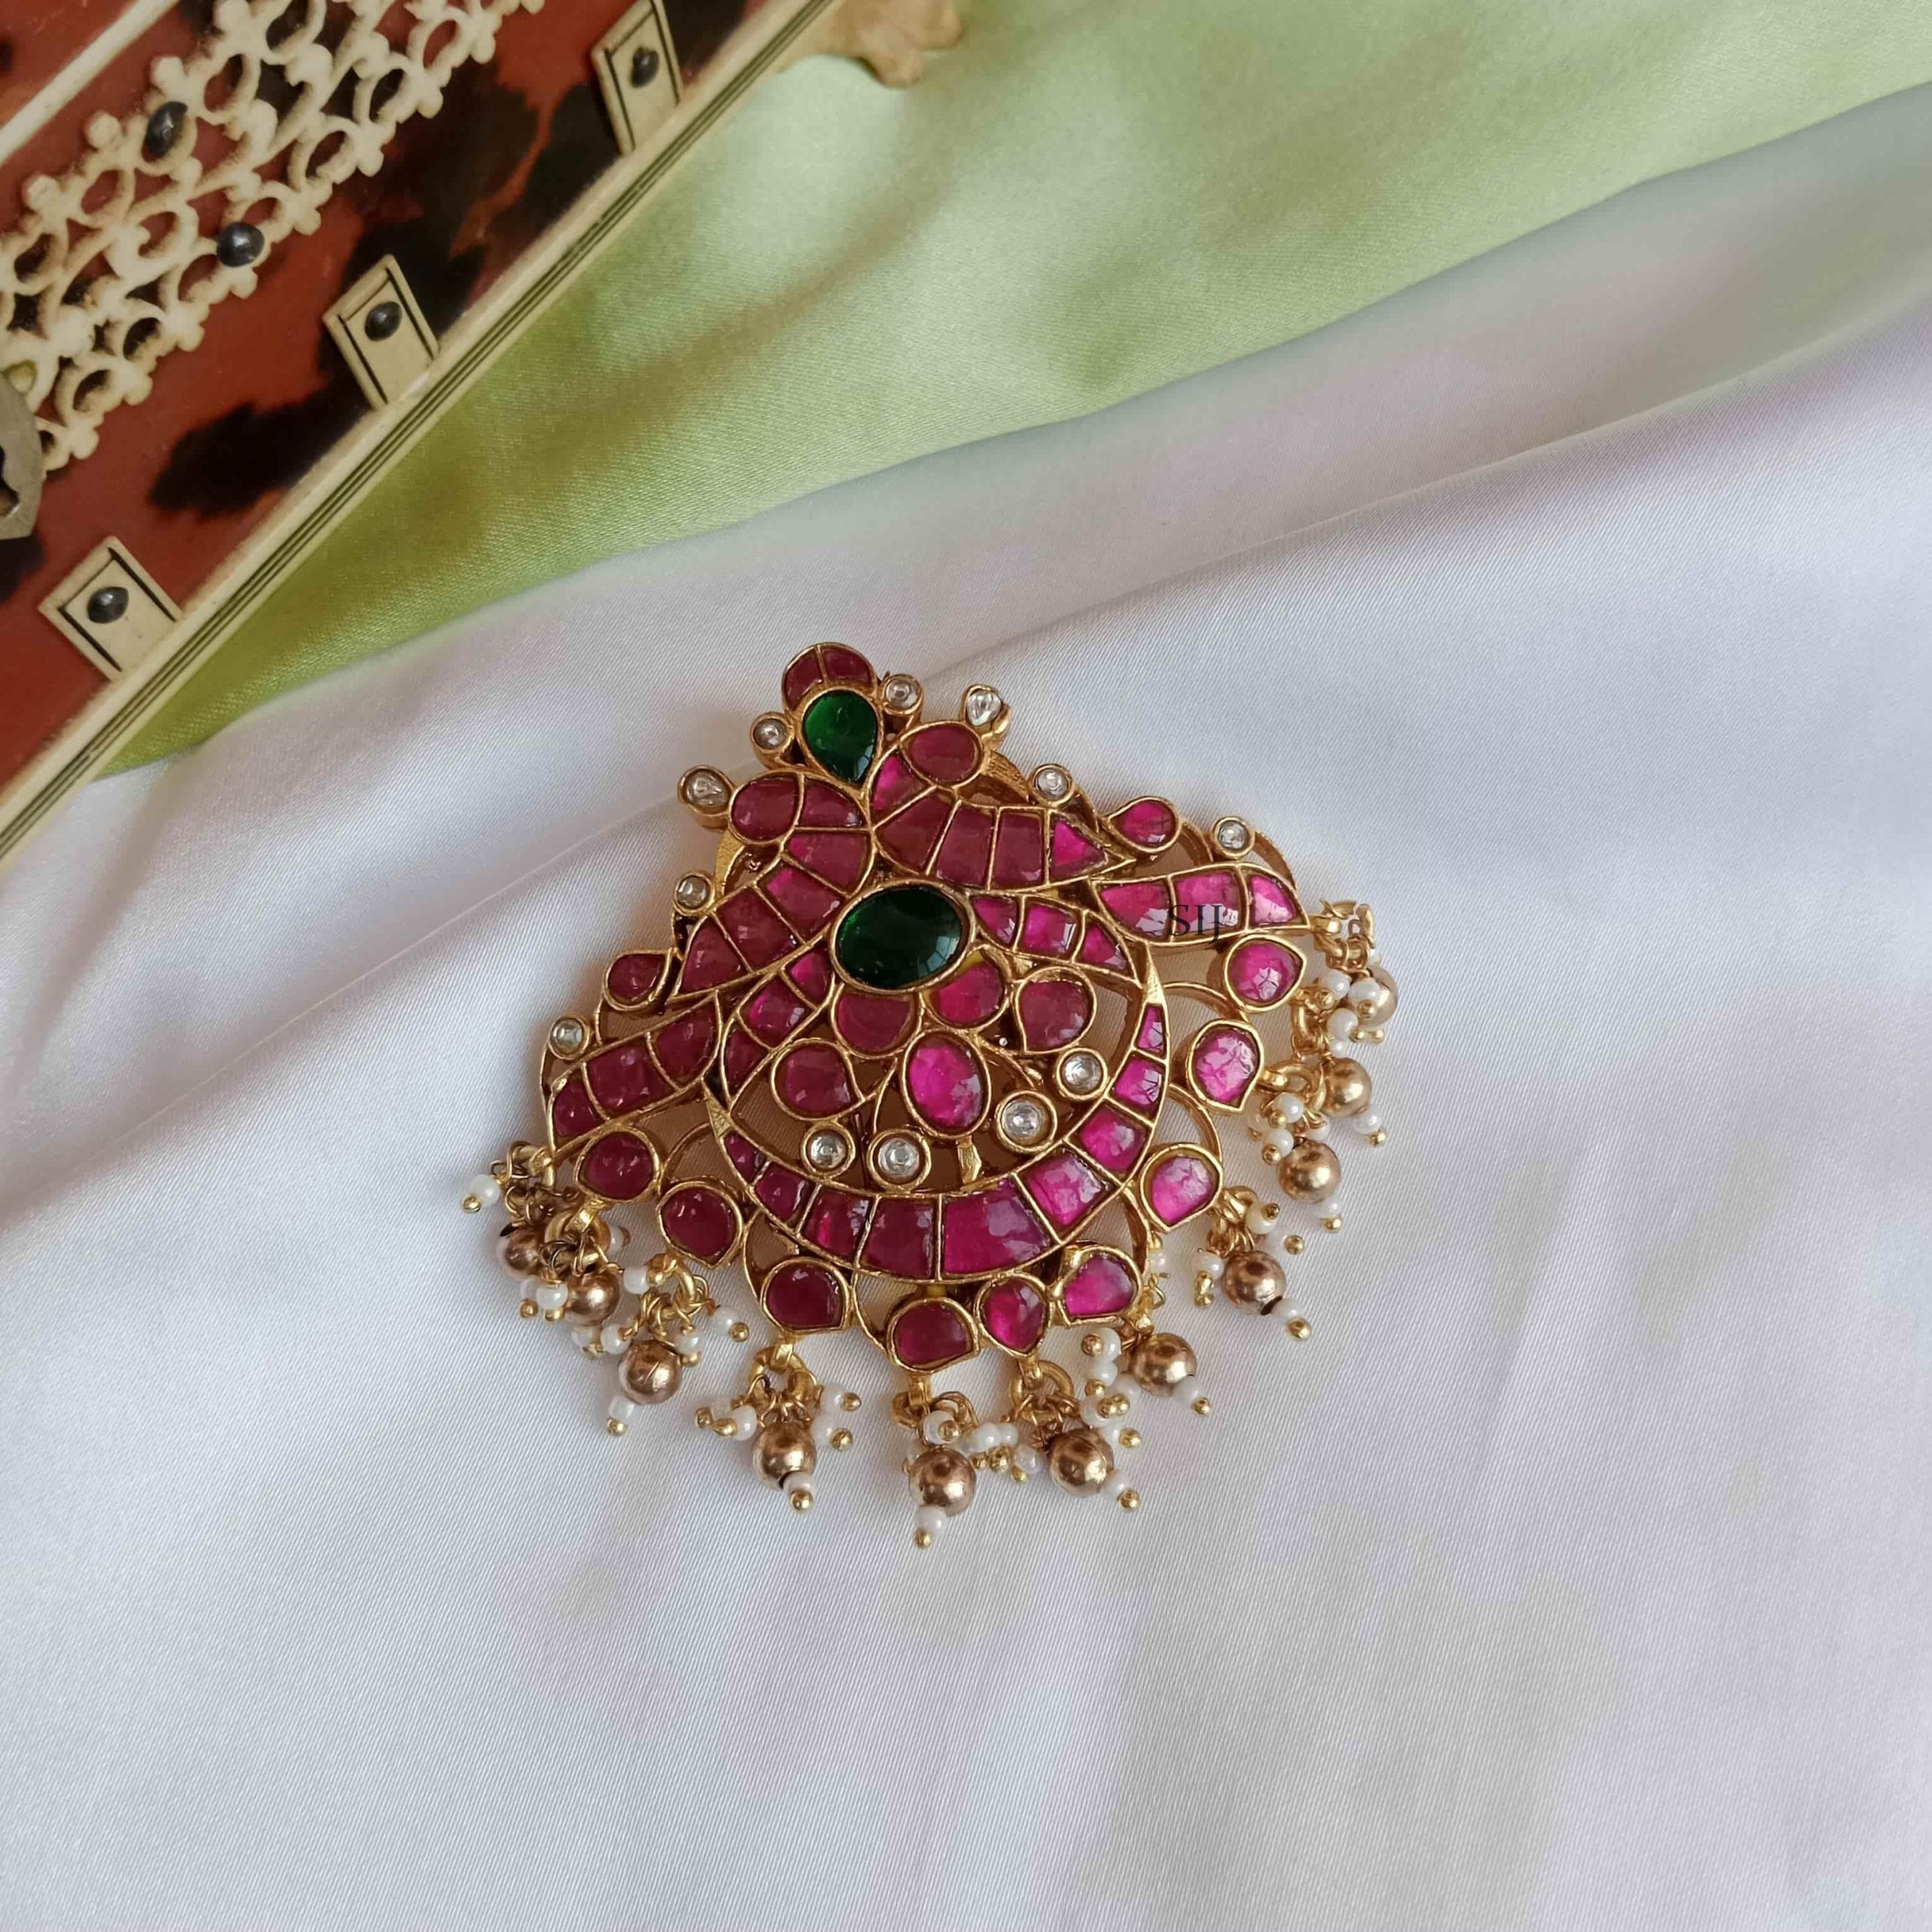 Attractive Jadau Pendant with Gold Bead Drops